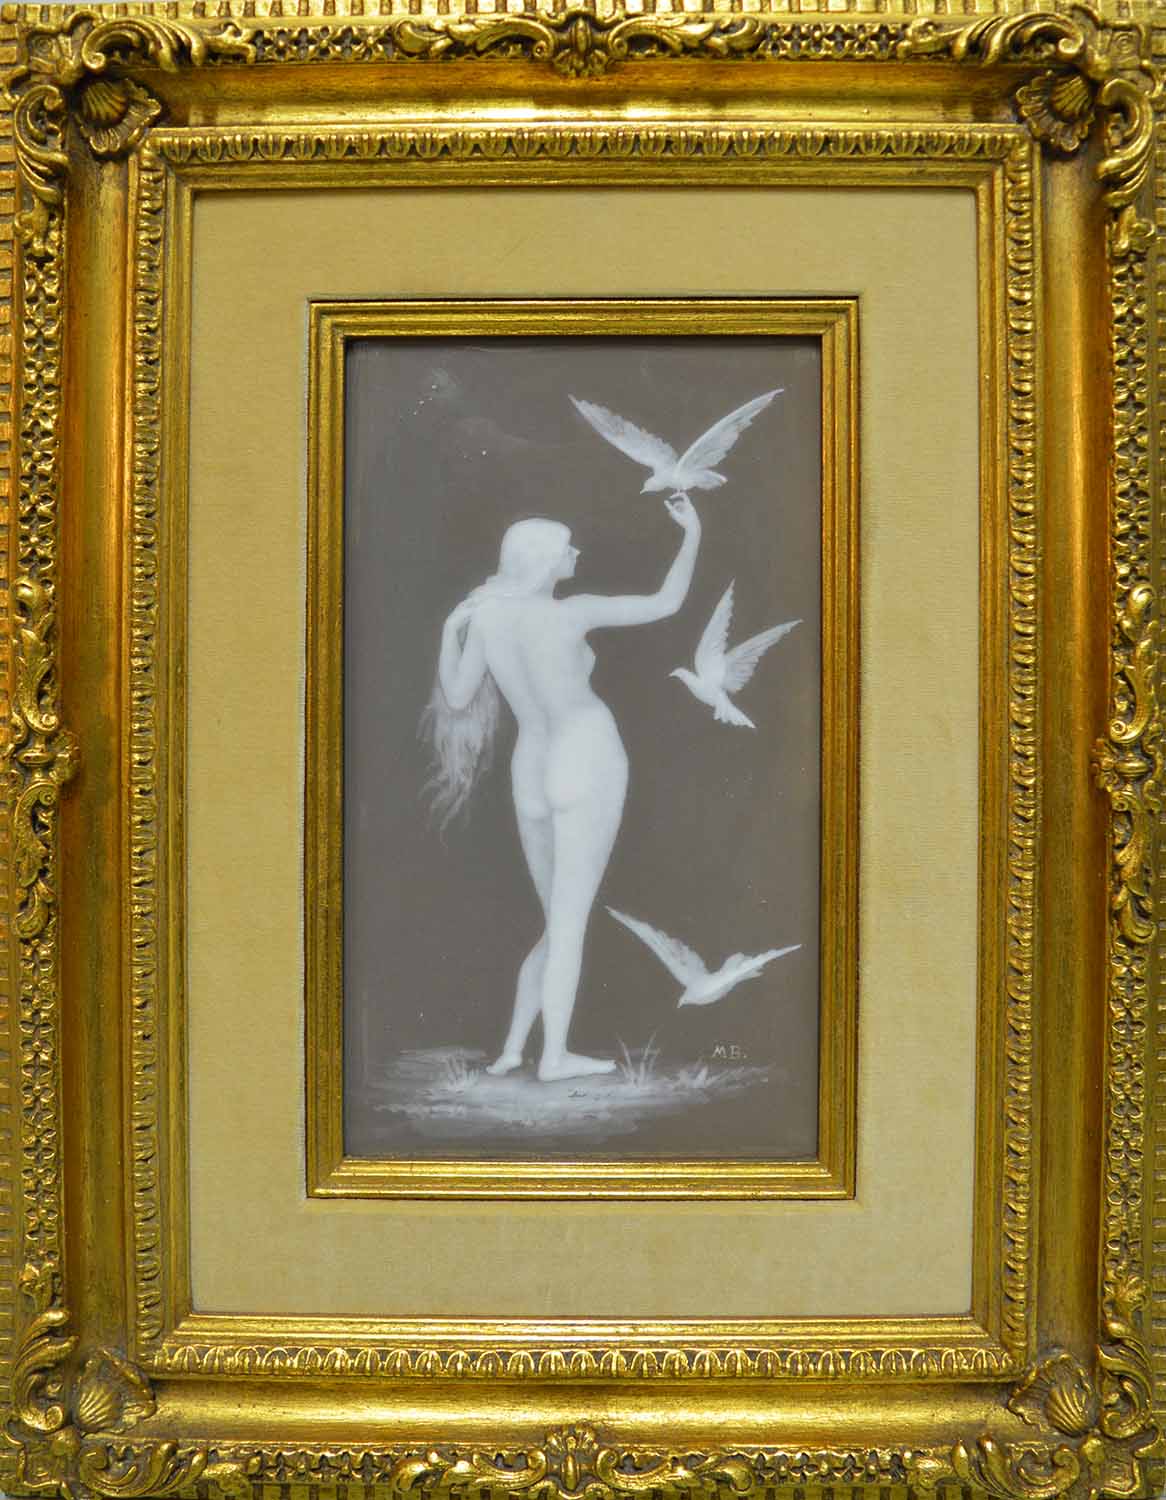 PATE SUR PATE PORCELAIN PLAQUE, depicting a naked lady and three doves, signed initials M B,